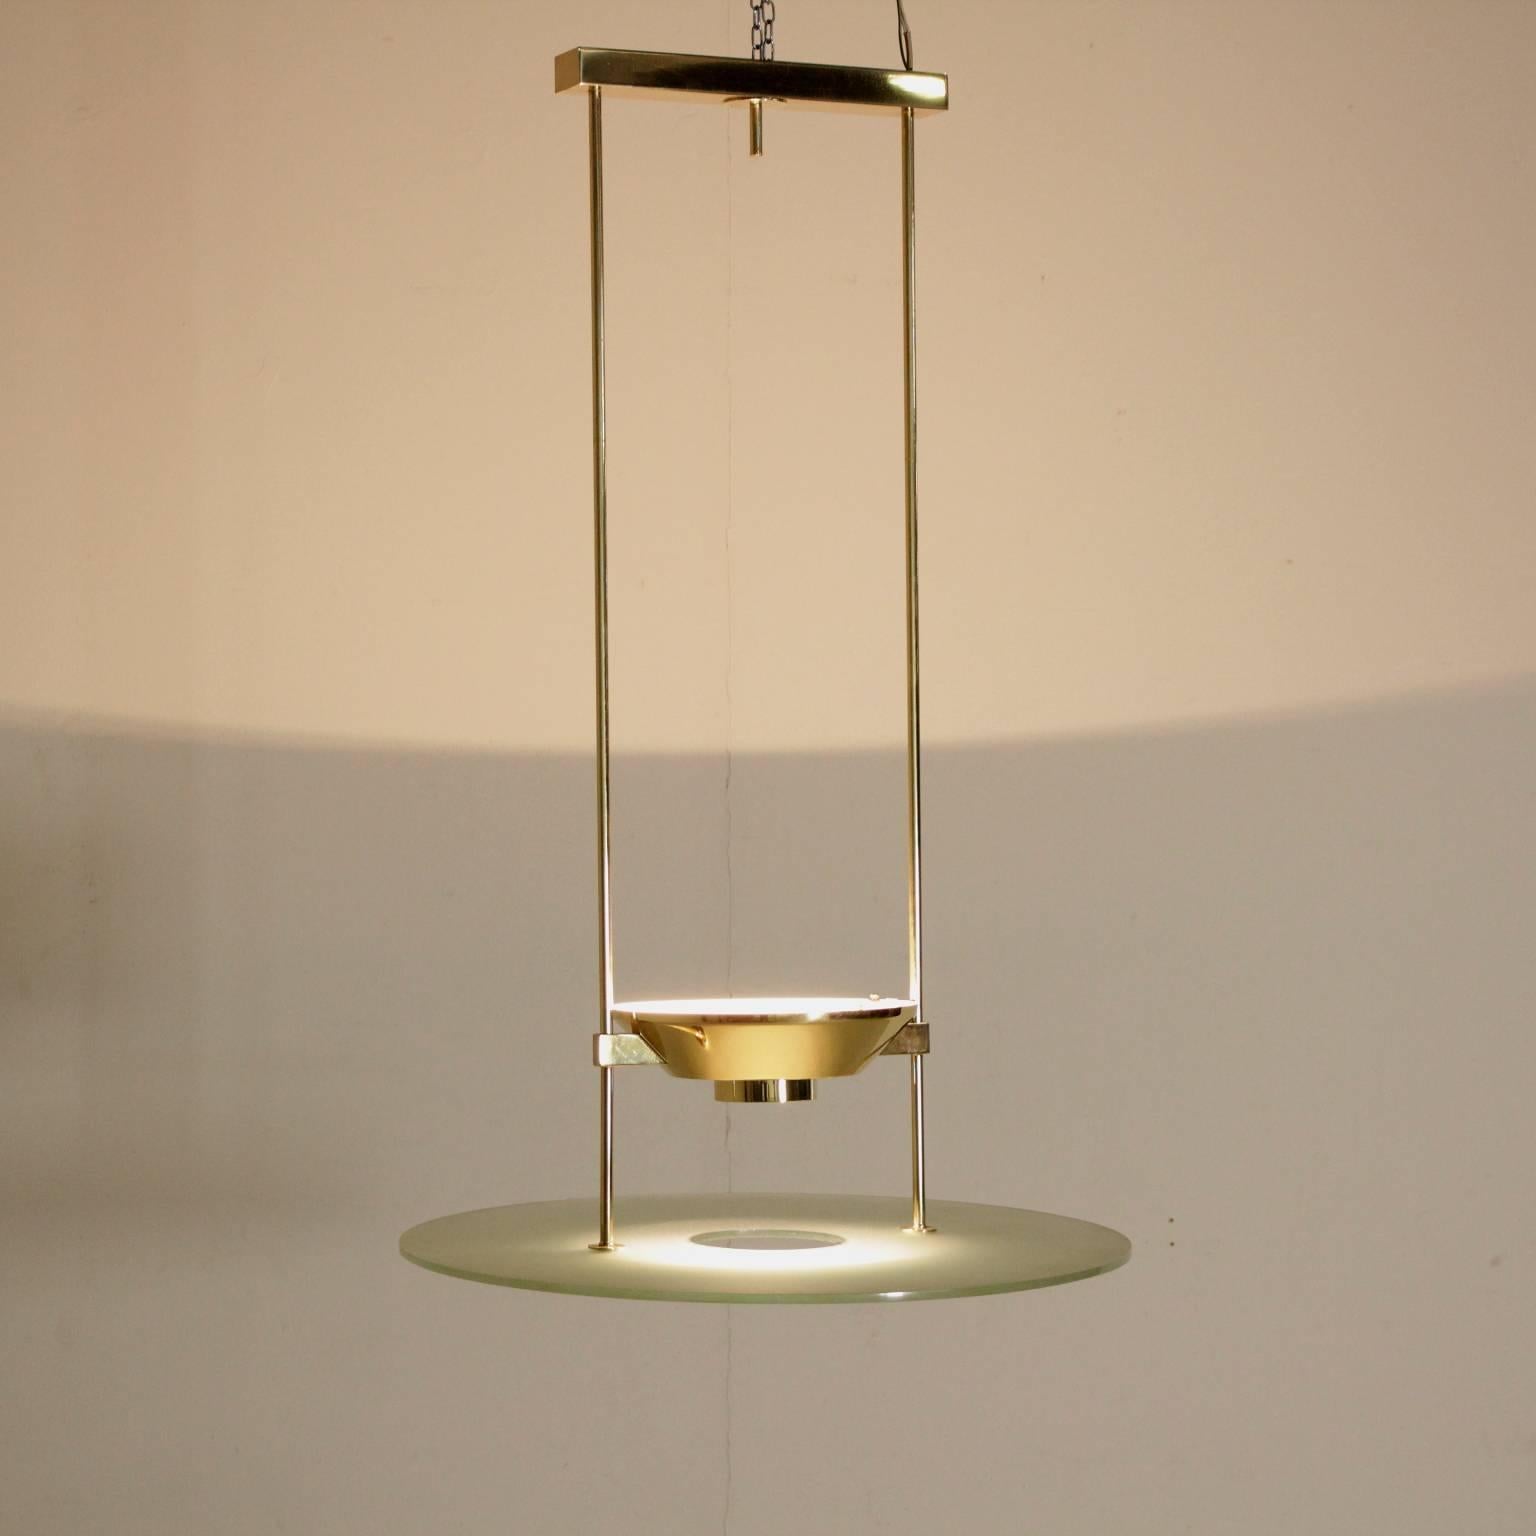 Ceiling lamp by Lumi, brass, glass, satin polished wire. Manufactured in Italy, 1980s.